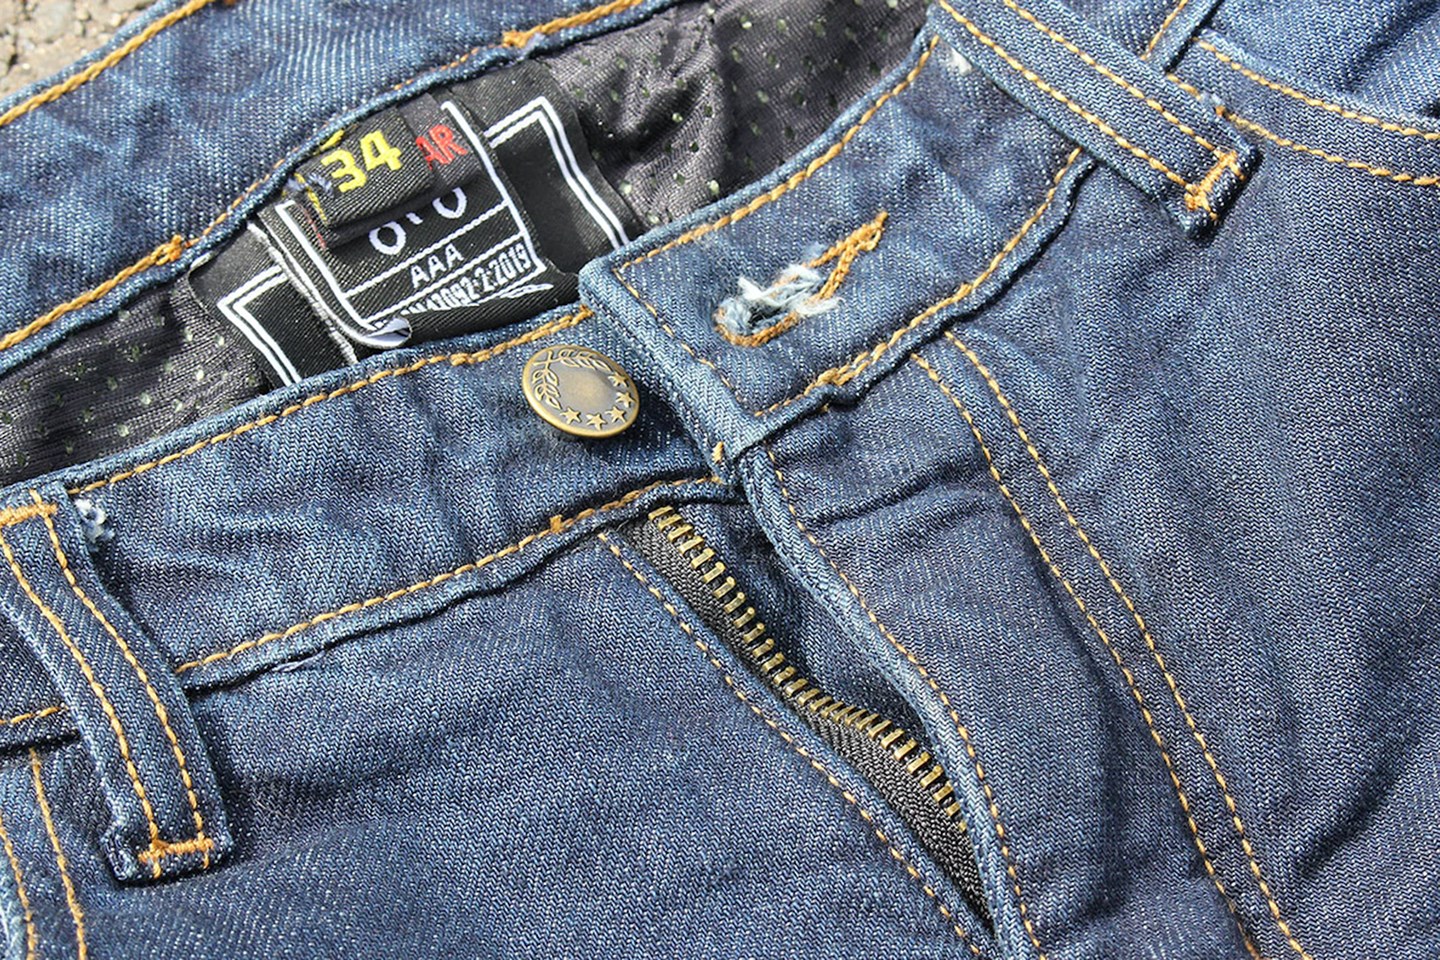 Riding jeans review: Weise Gator tried and tested | MCN